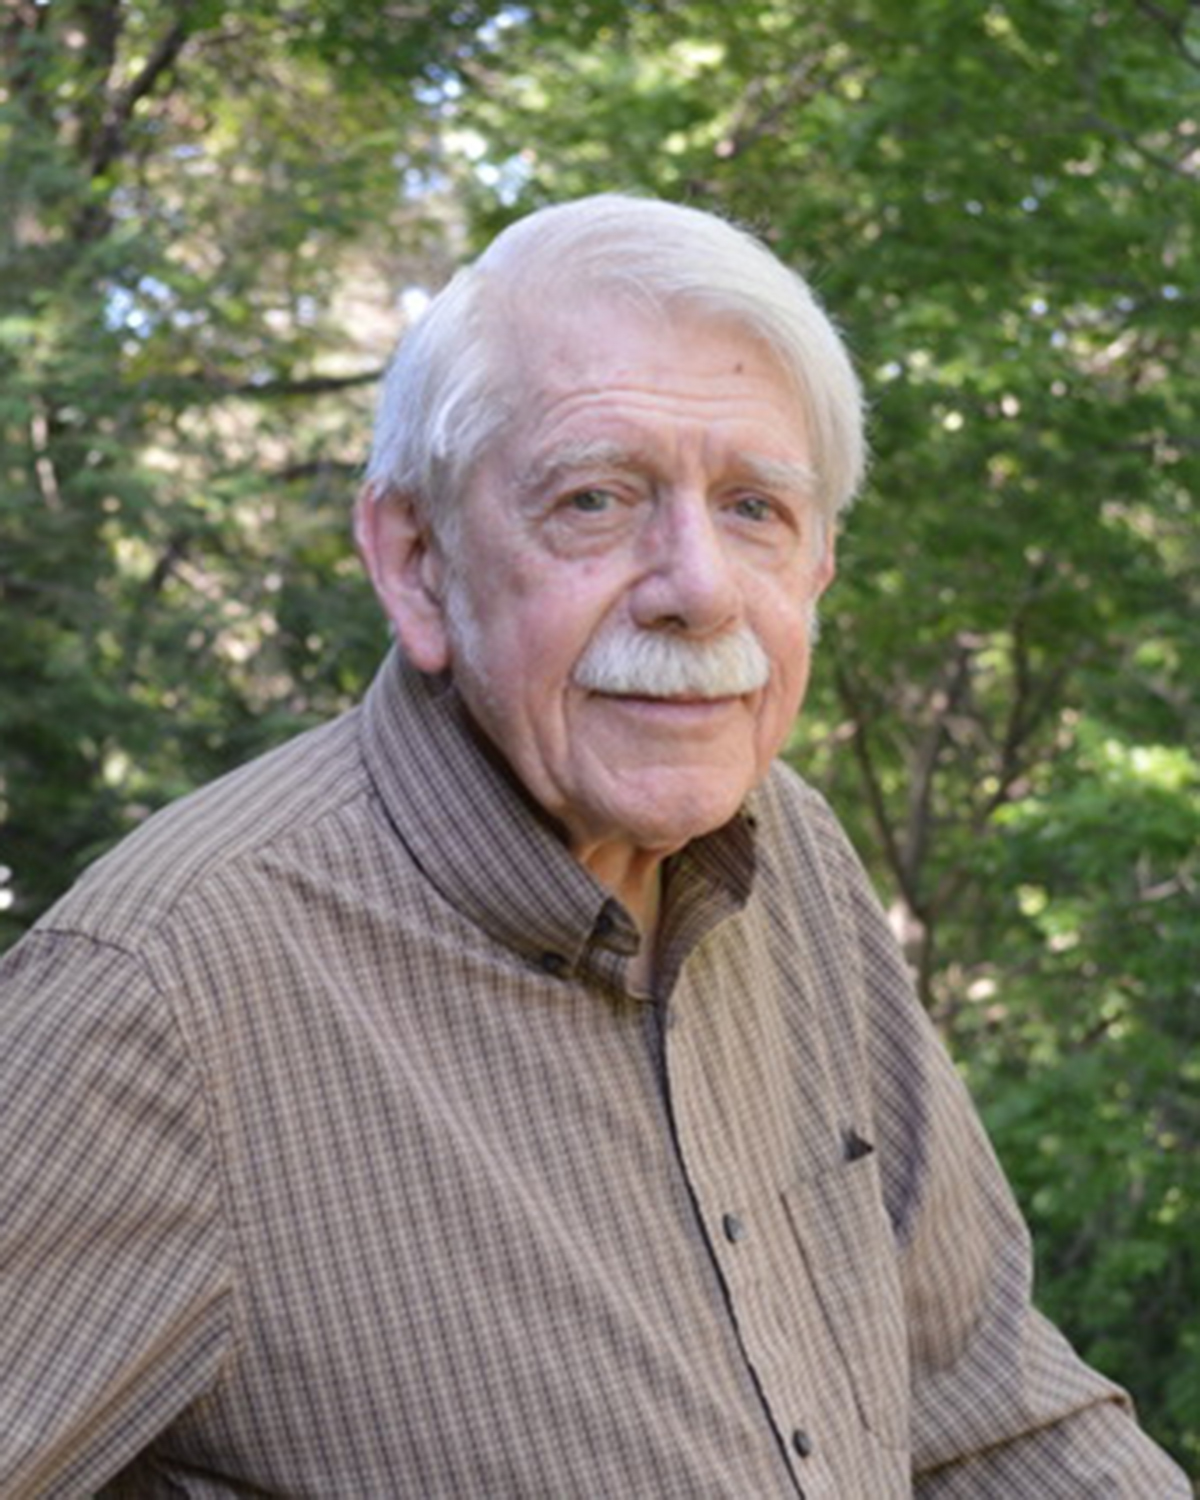 Bob Pepin (man with gray hair and mustache standing in front of trees)